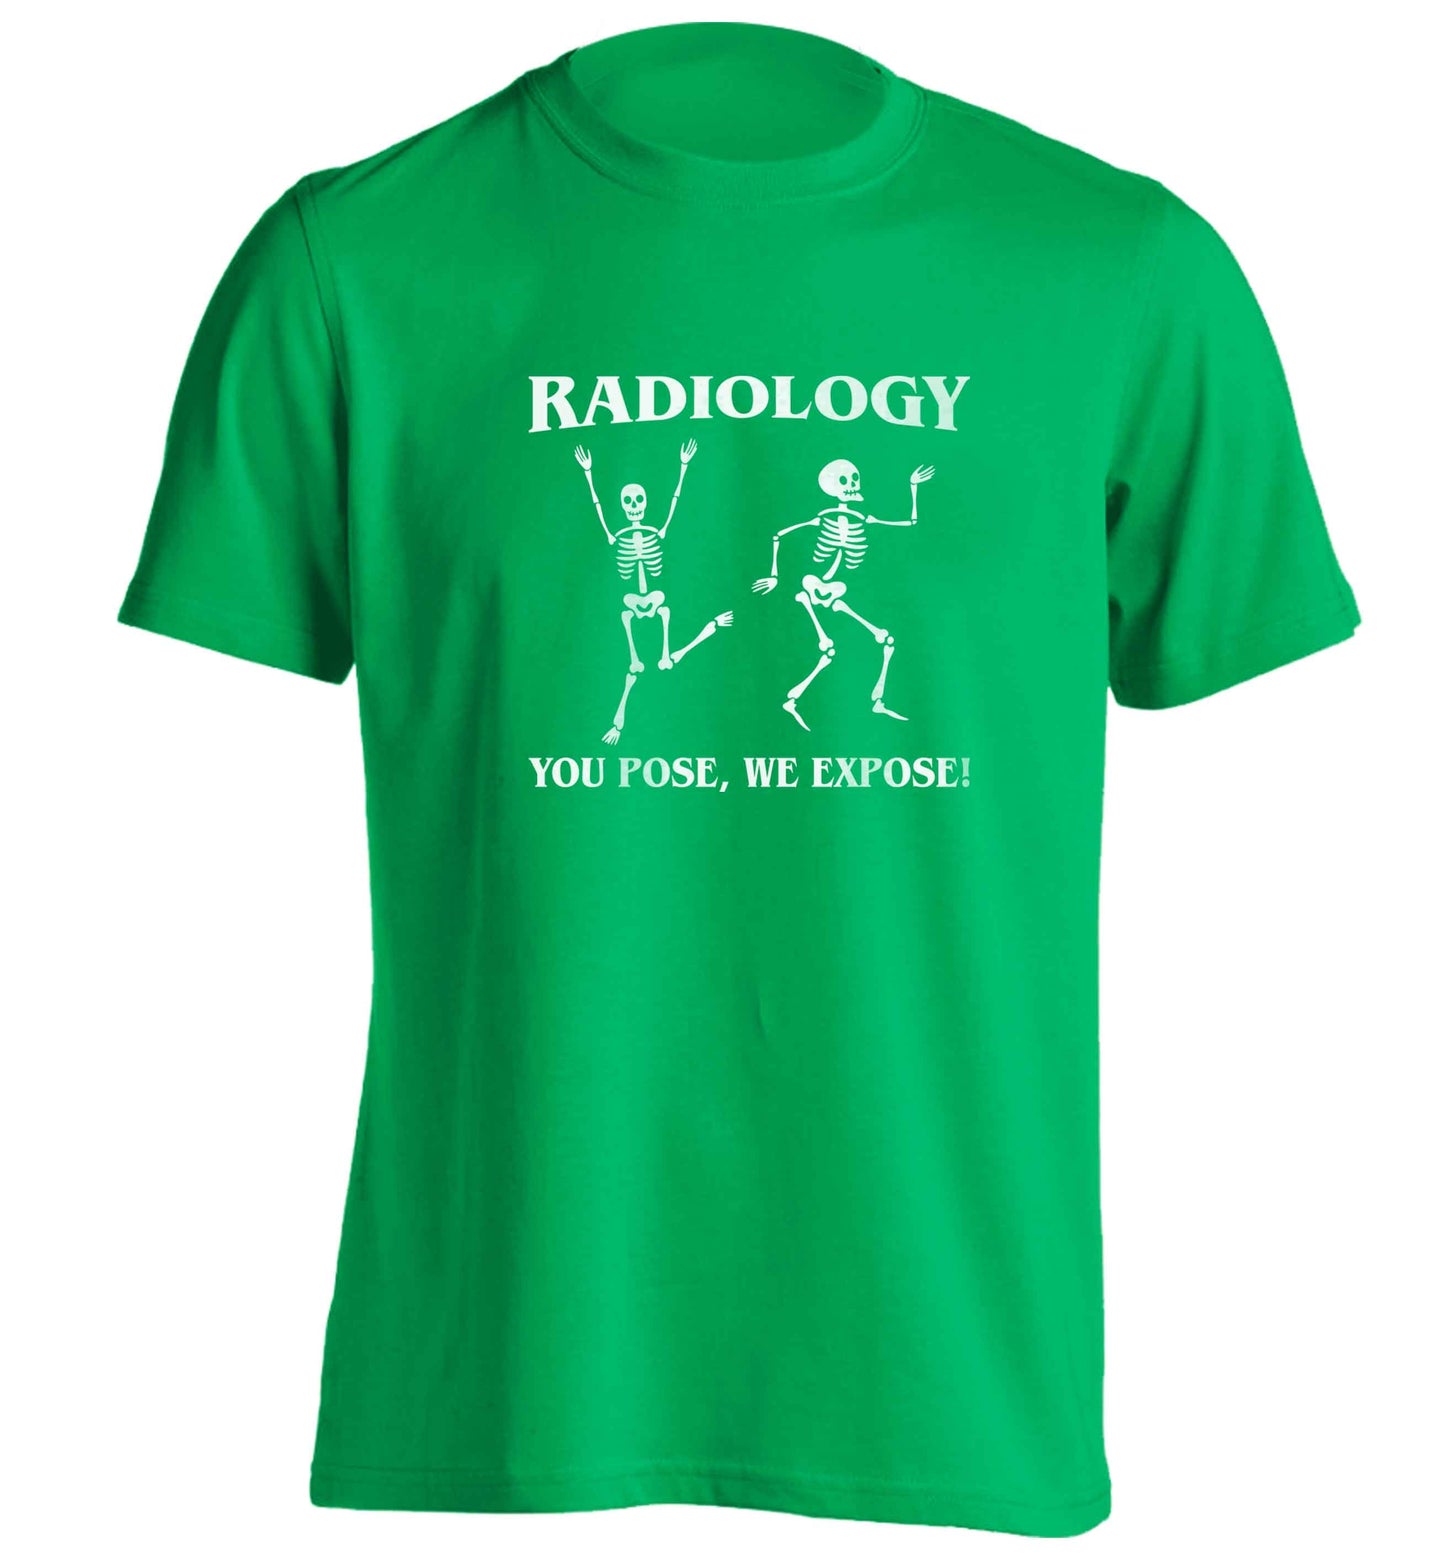 Radiology you pose we expose adults unisex green Tshirt 2XL